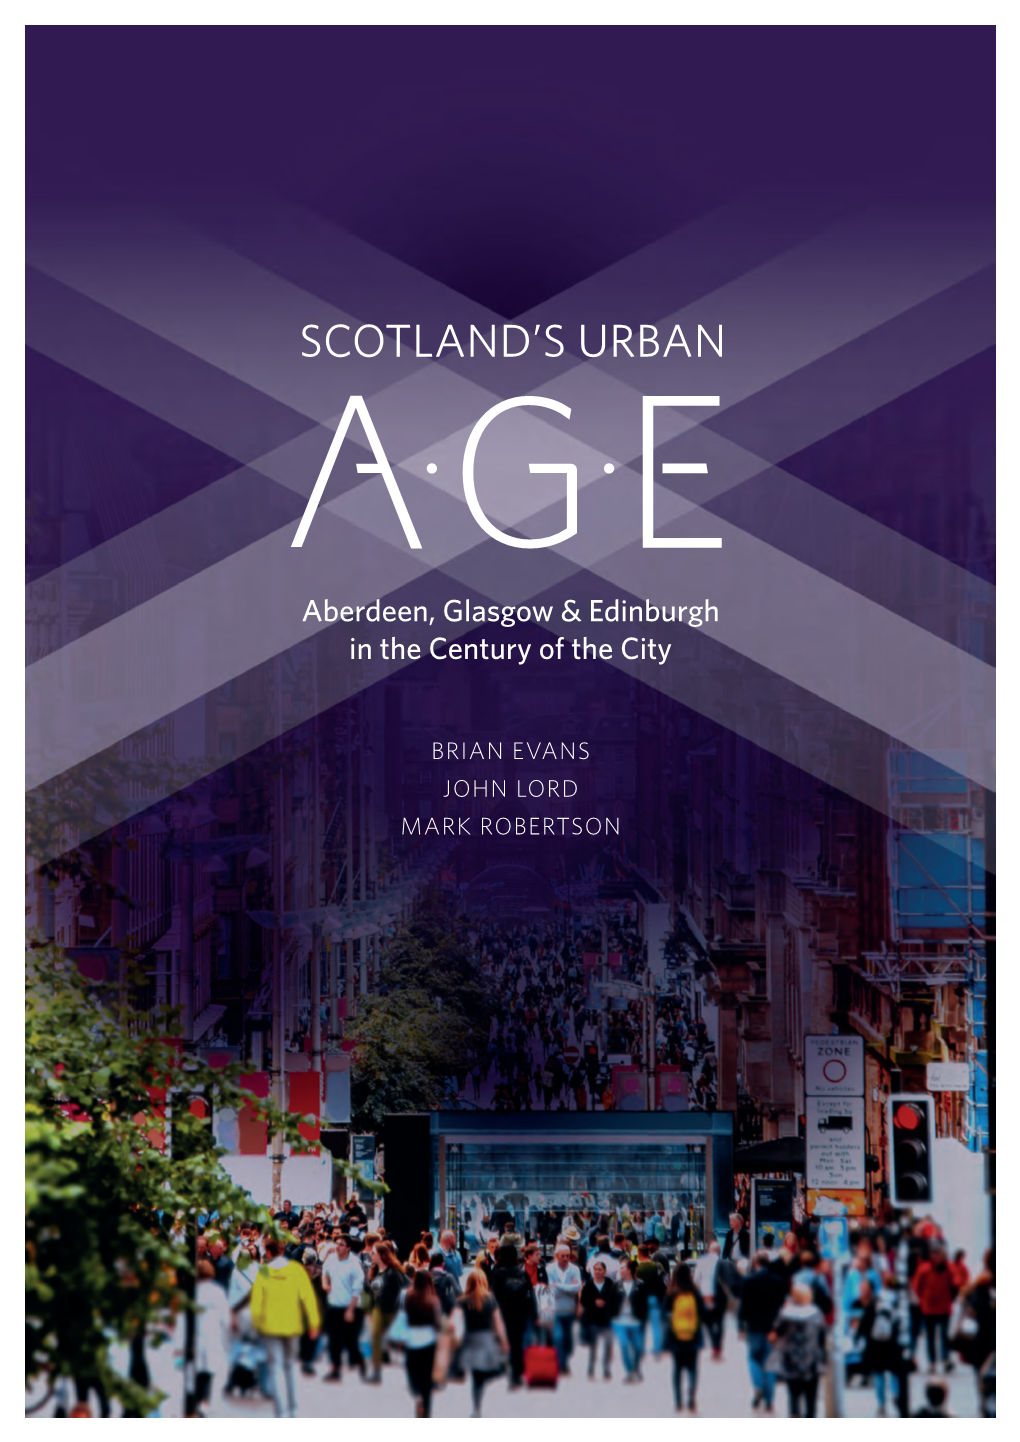 Aberdeen, Glasgow and Edinburgh in the Century of the City…